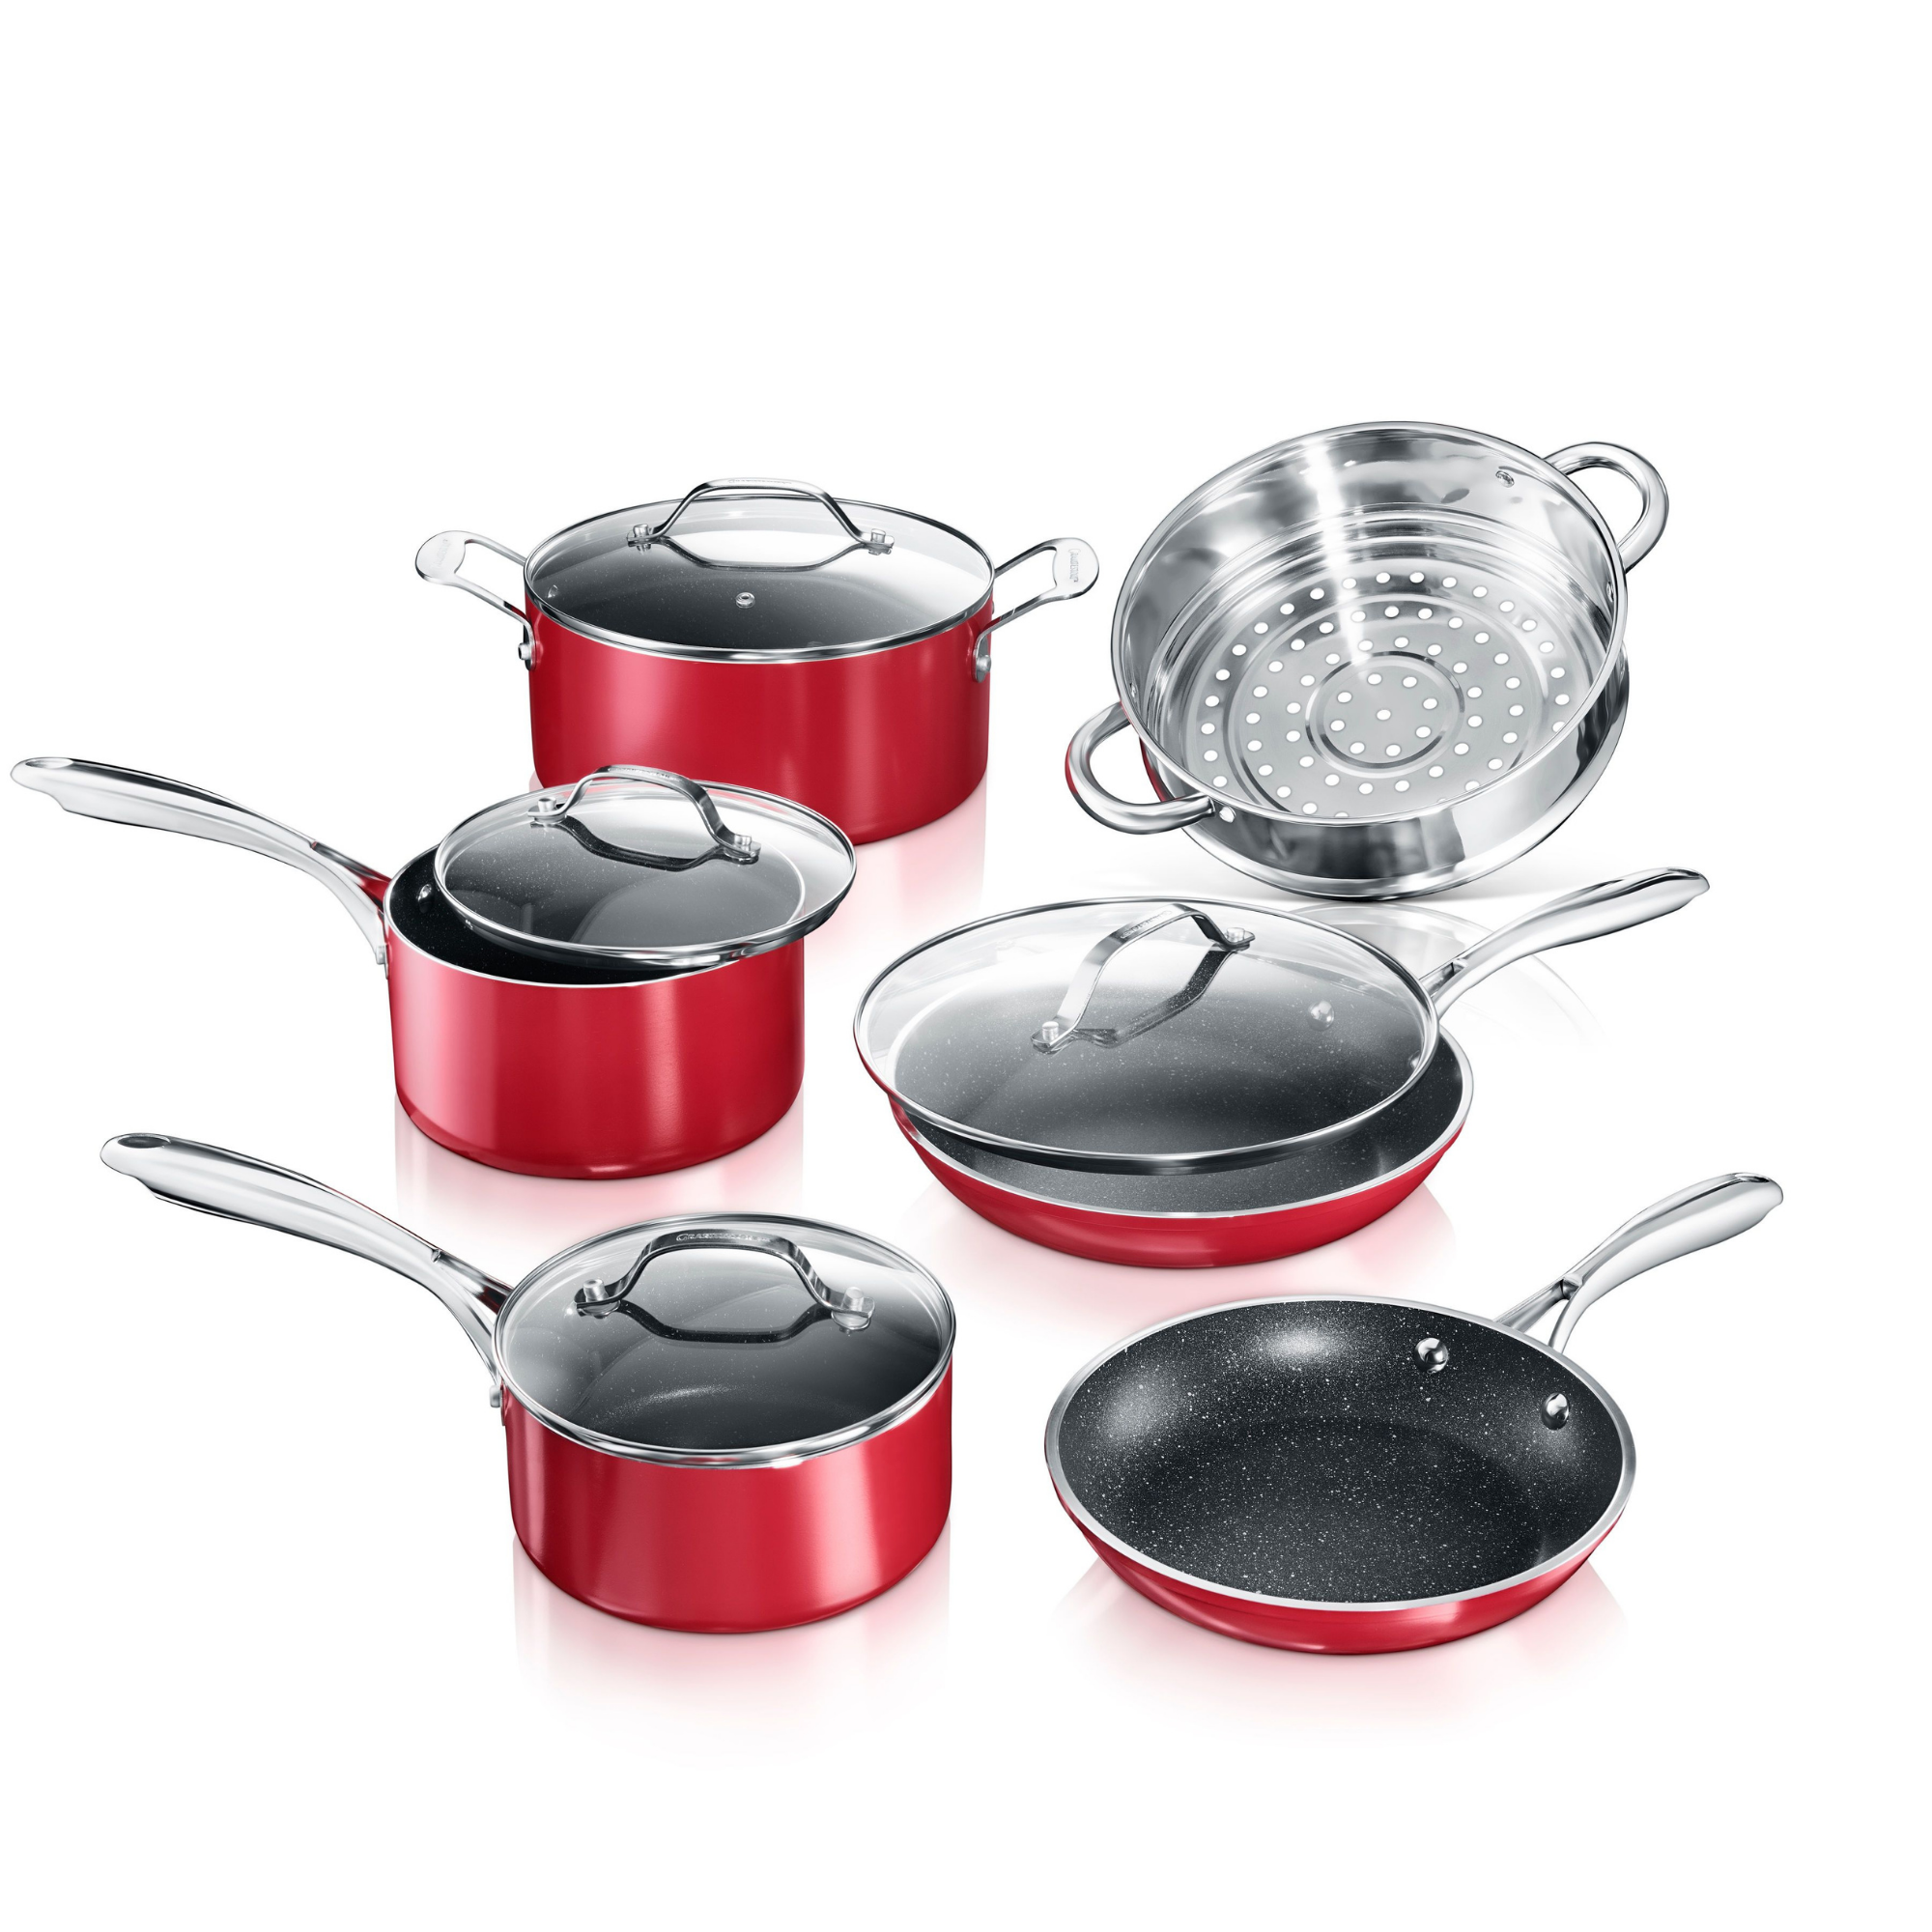 Set of non-stick cookware for 3-4 people in die-cast aluminum for